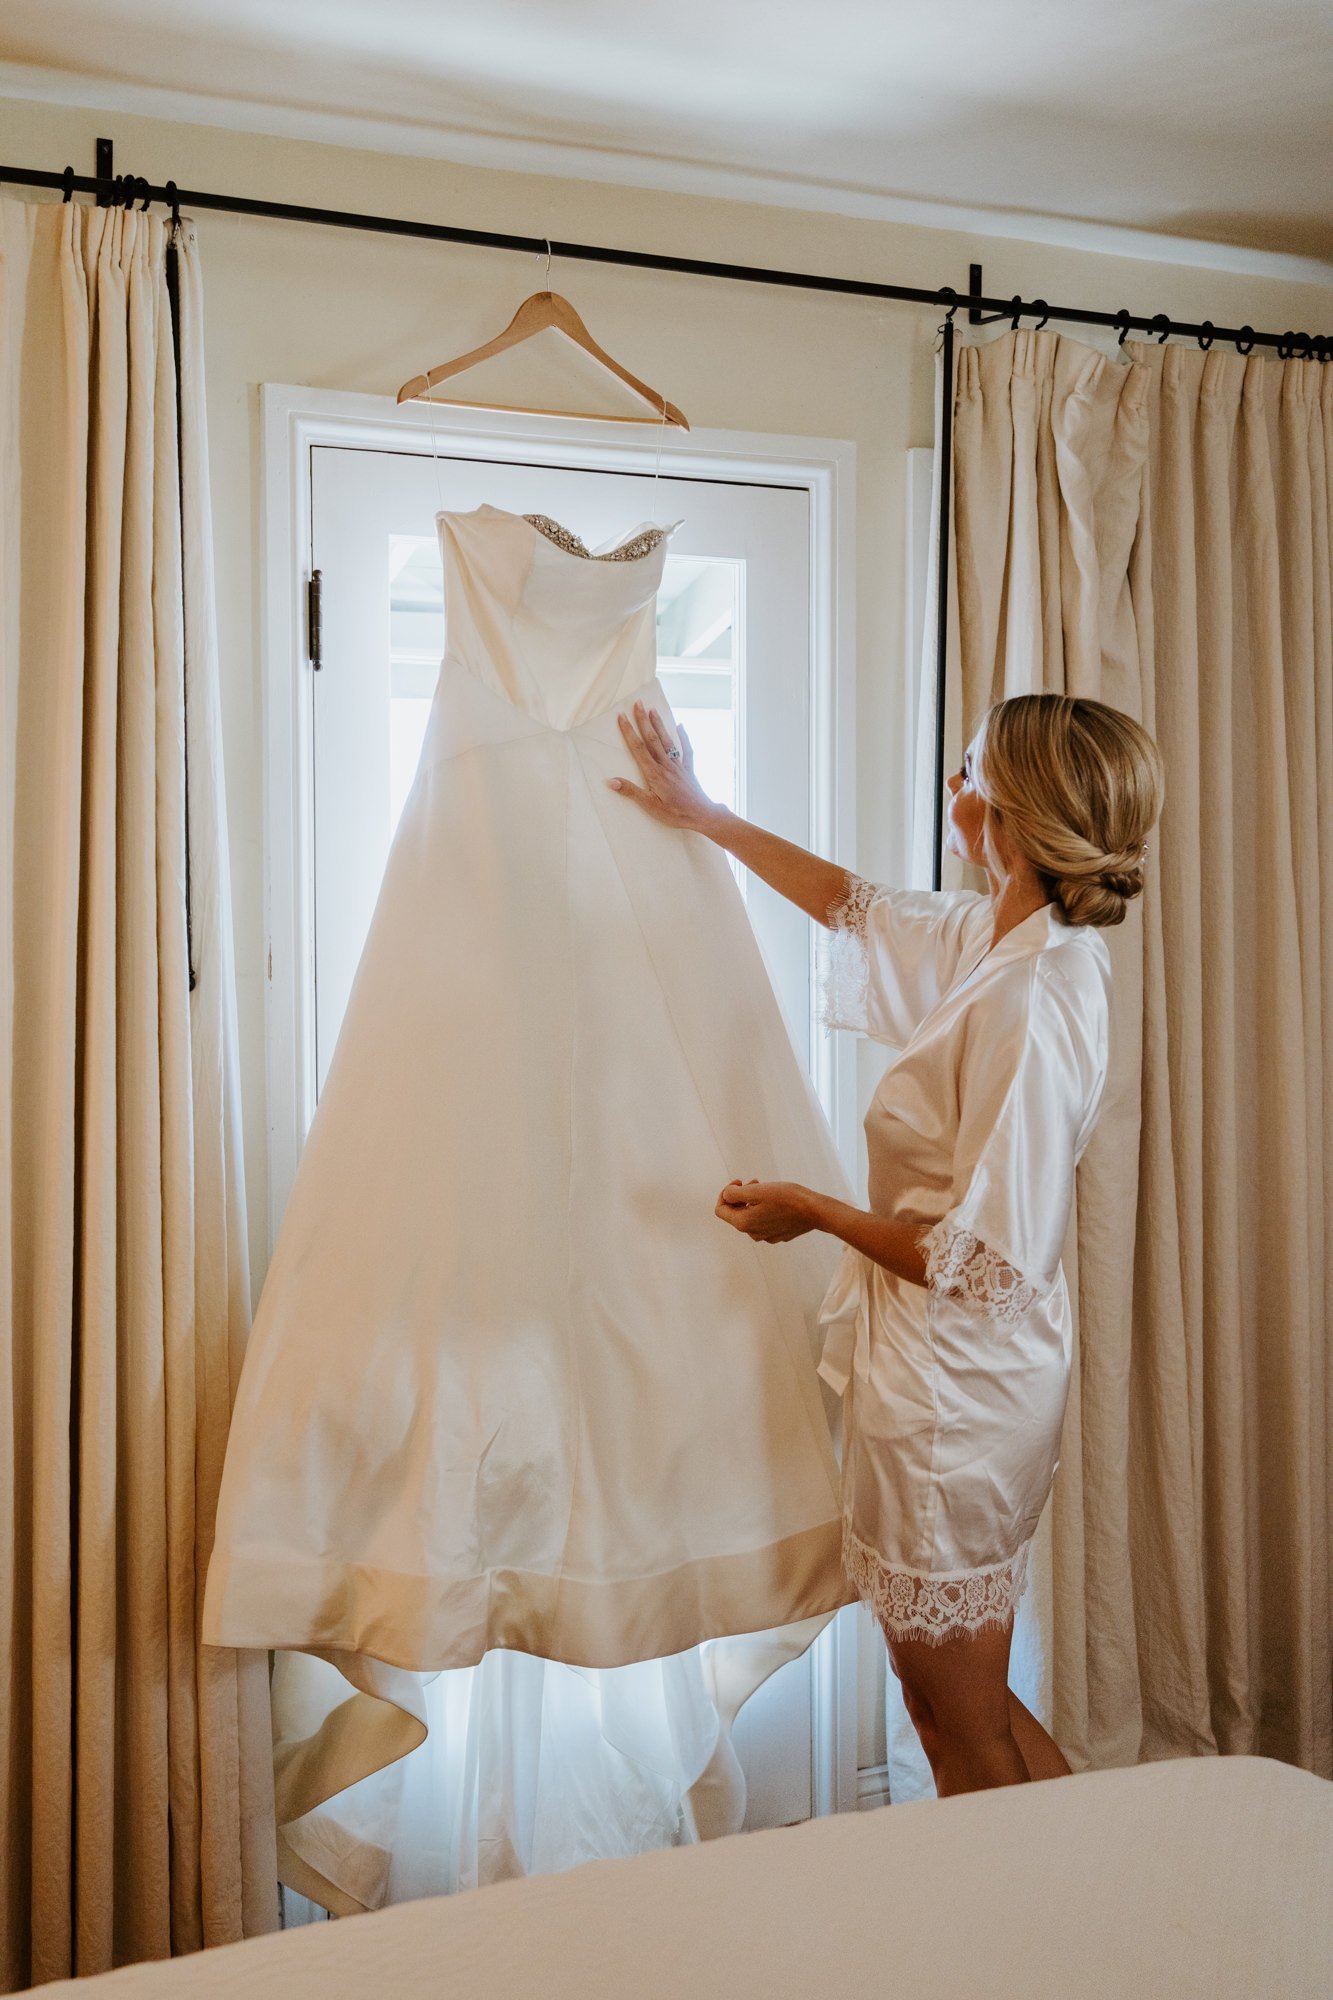 Bride getting ready at The O’Donnell House Palm Springs Wedding Photography by Tida Svy, www.tidasvy.com